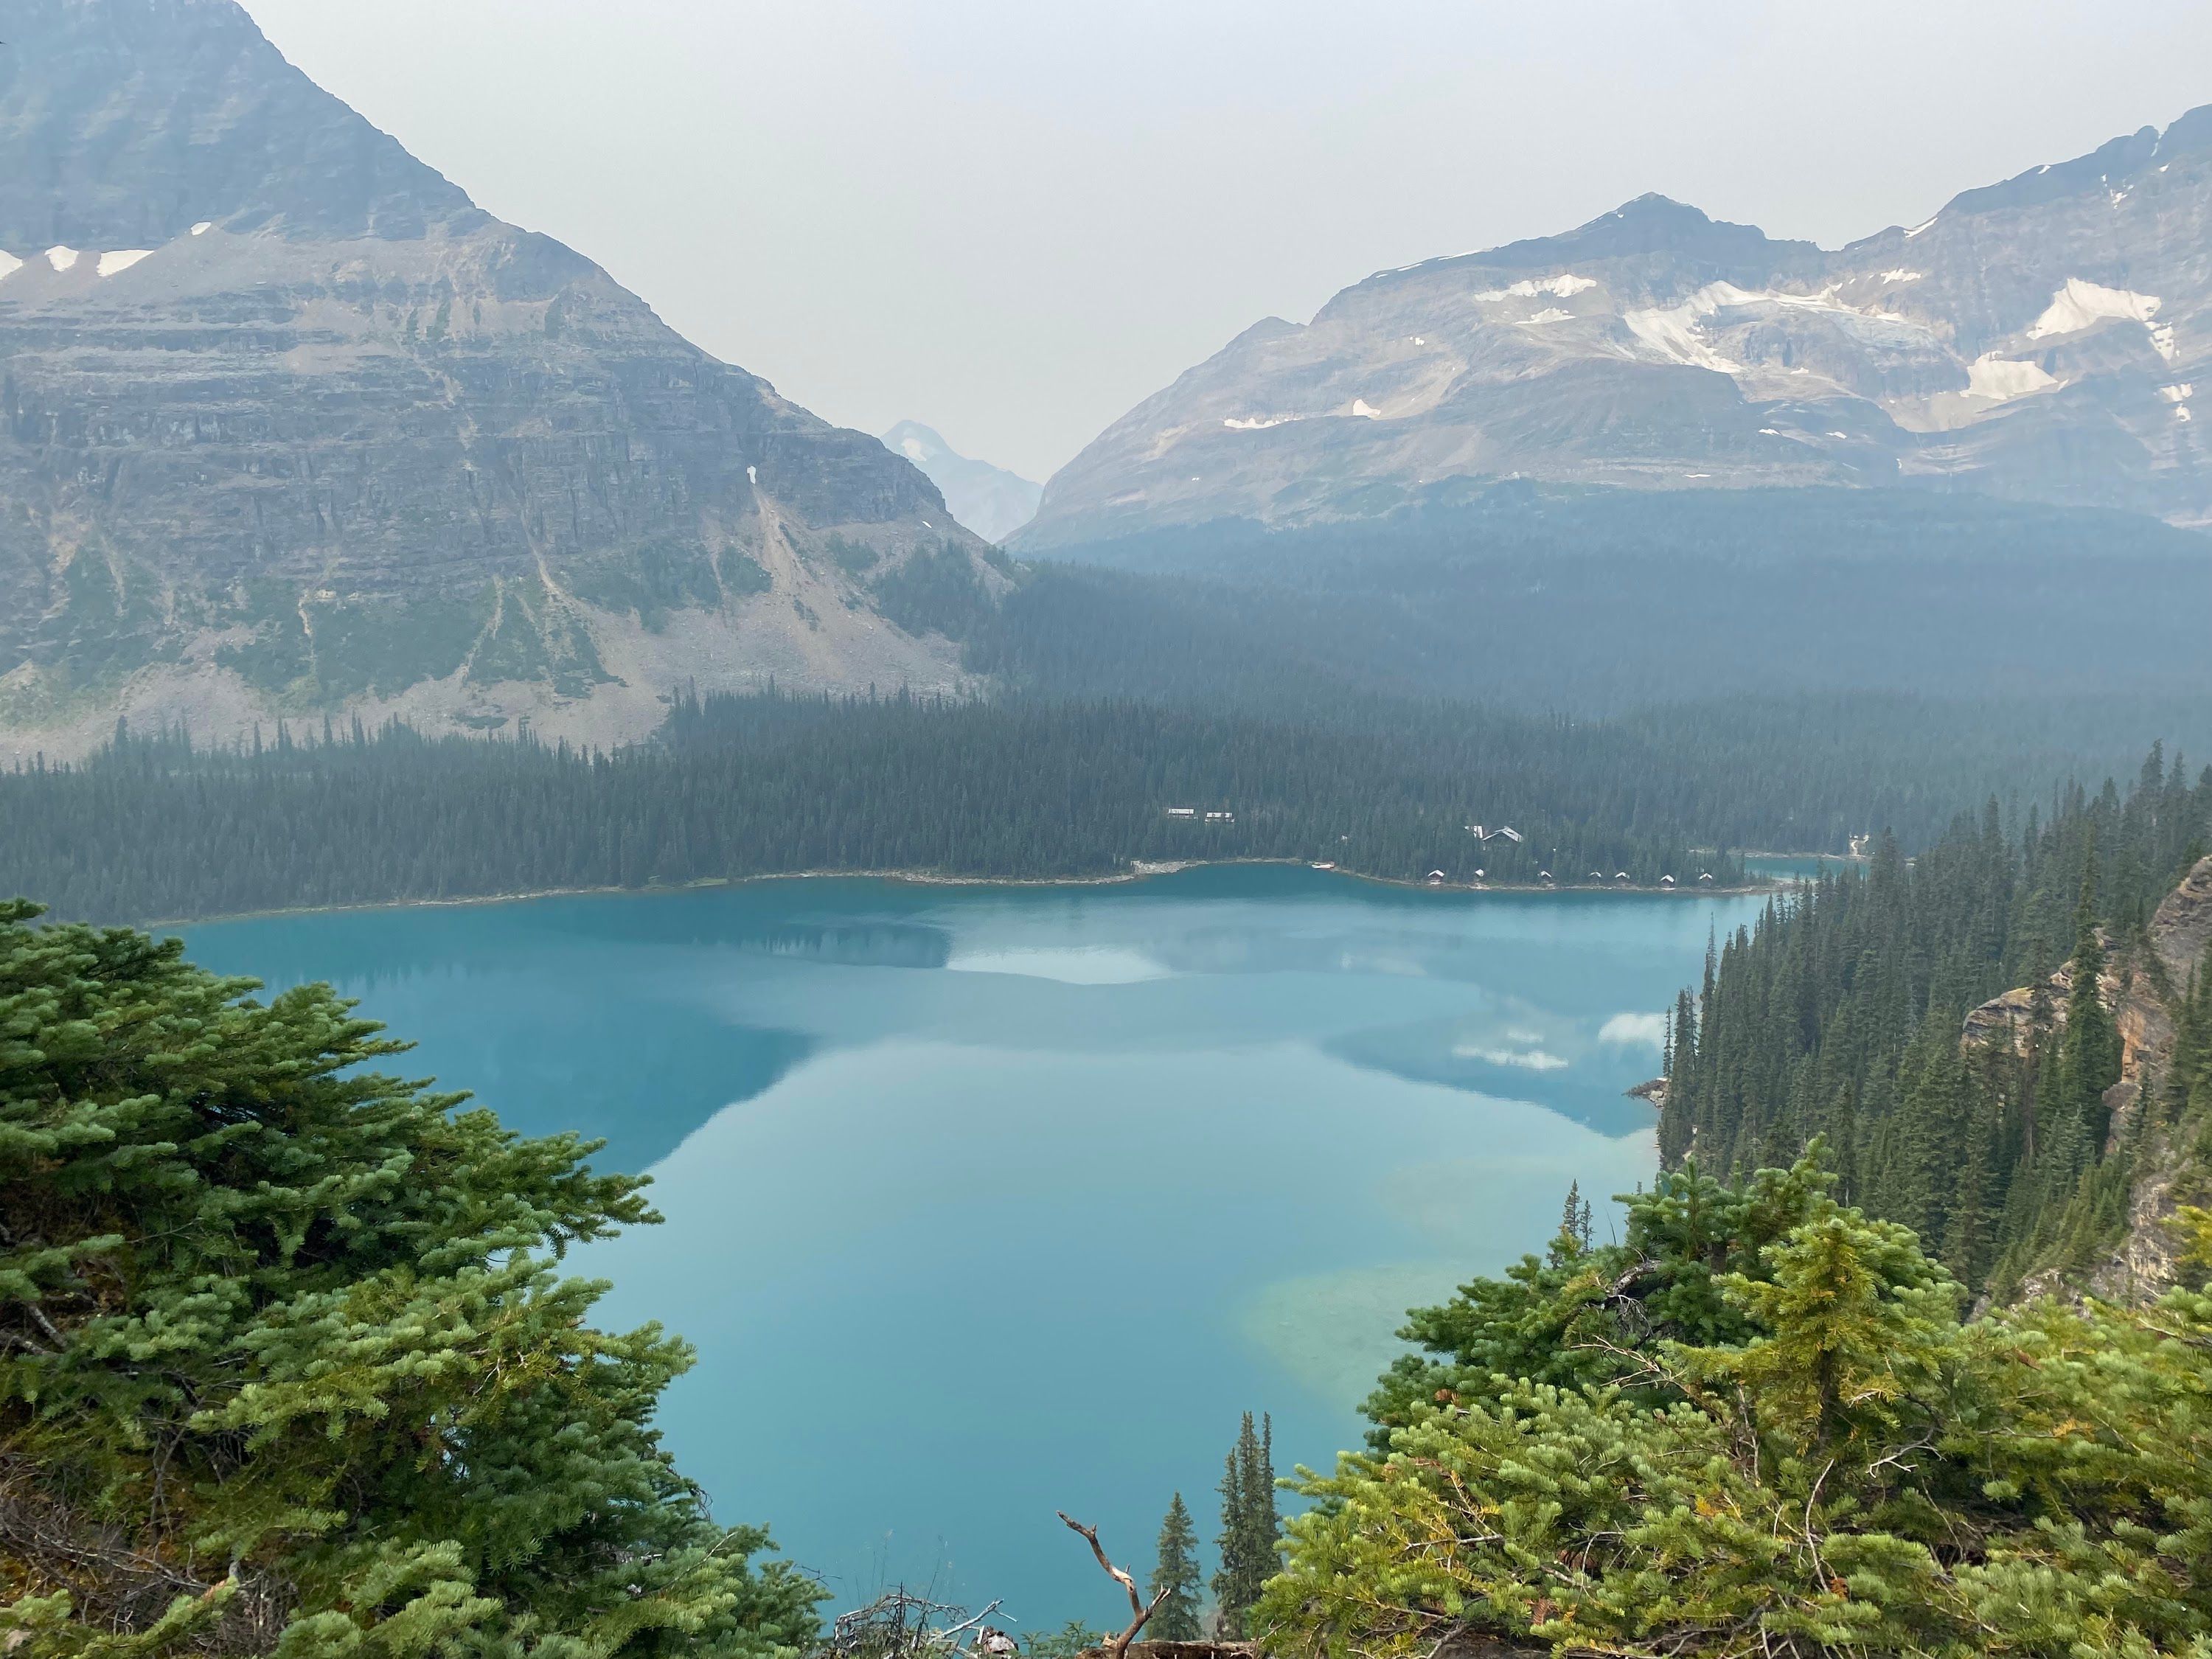 Mountain in British Columbia overlooking a light blue lake